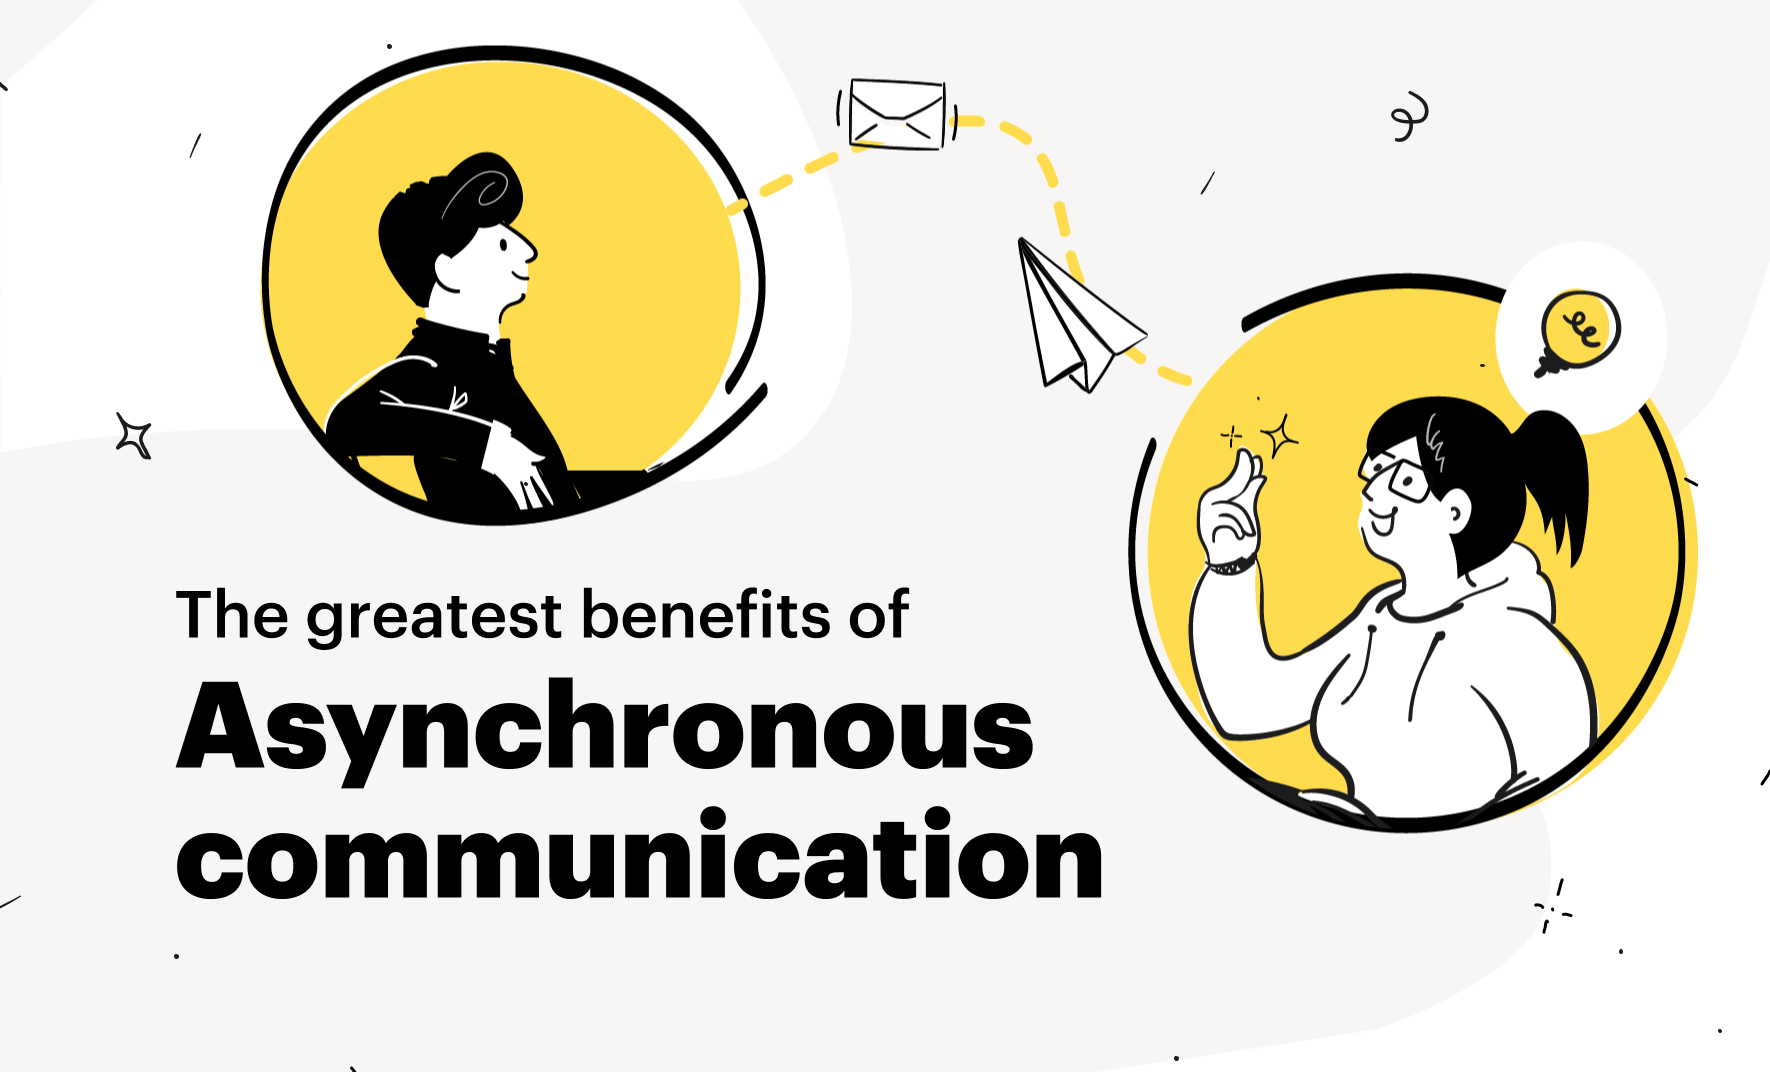 The greatest benefits of Asynchronous communication in business